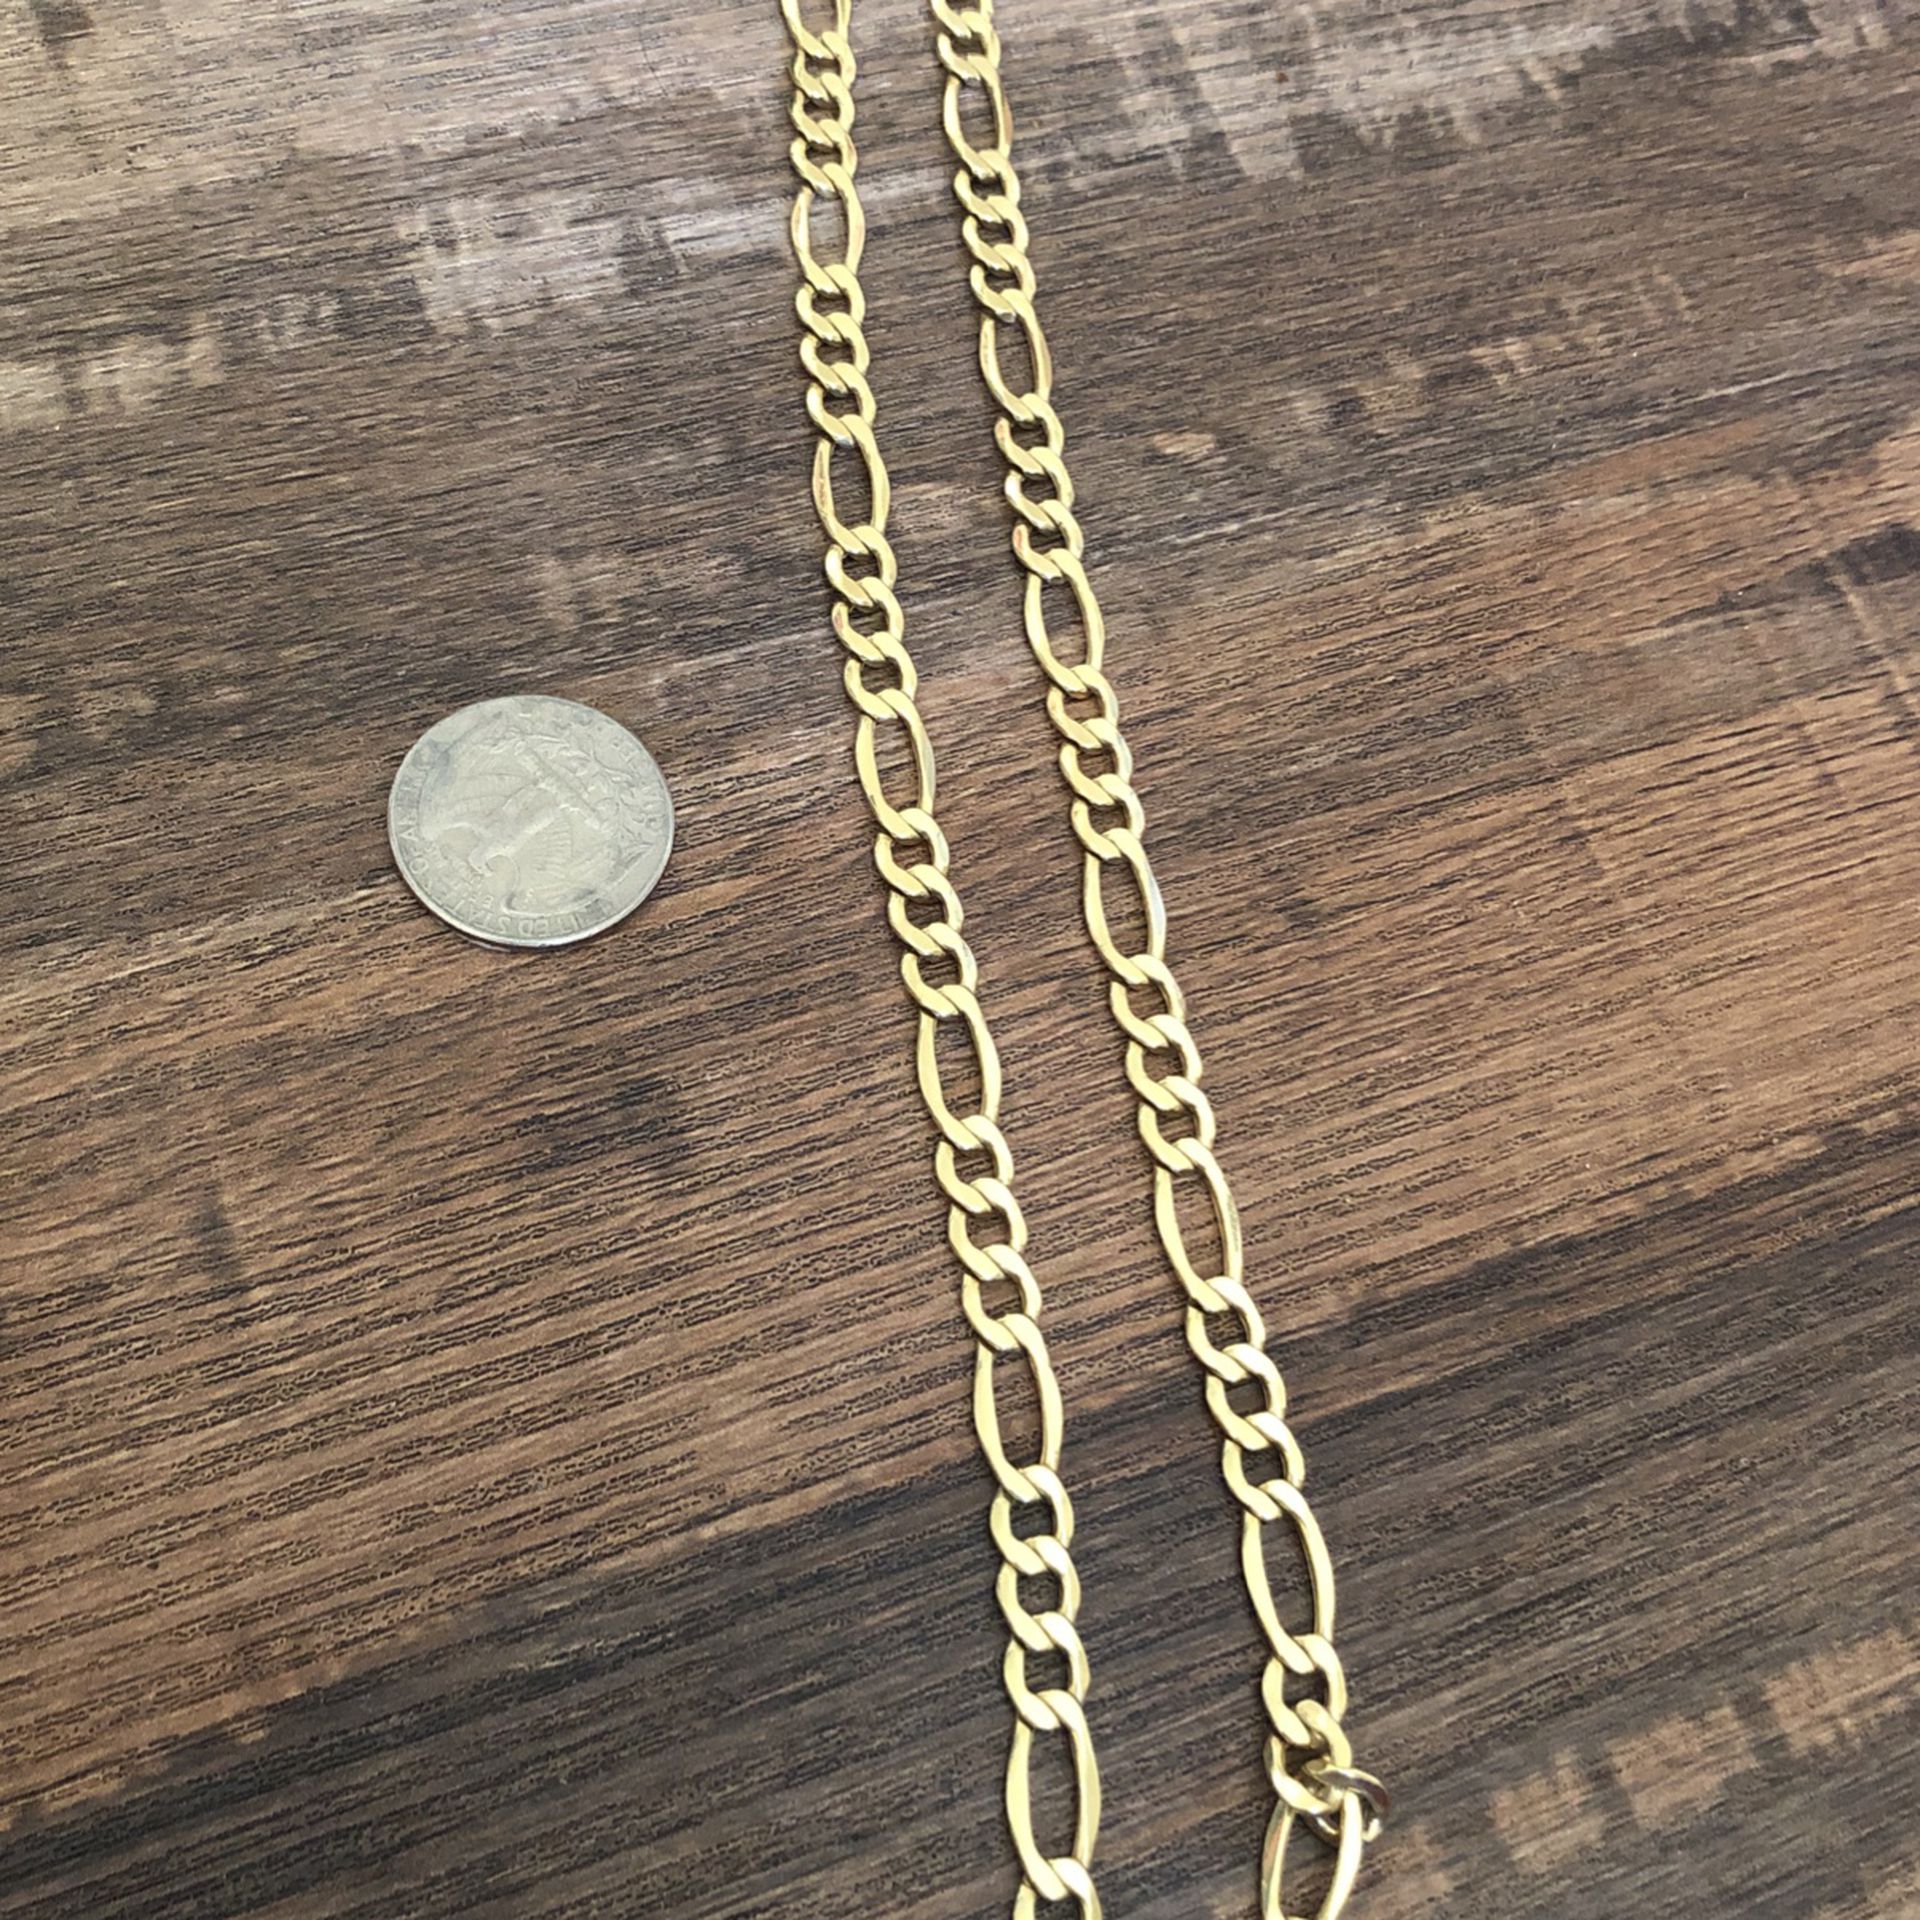 10k Neckless Paid 700 